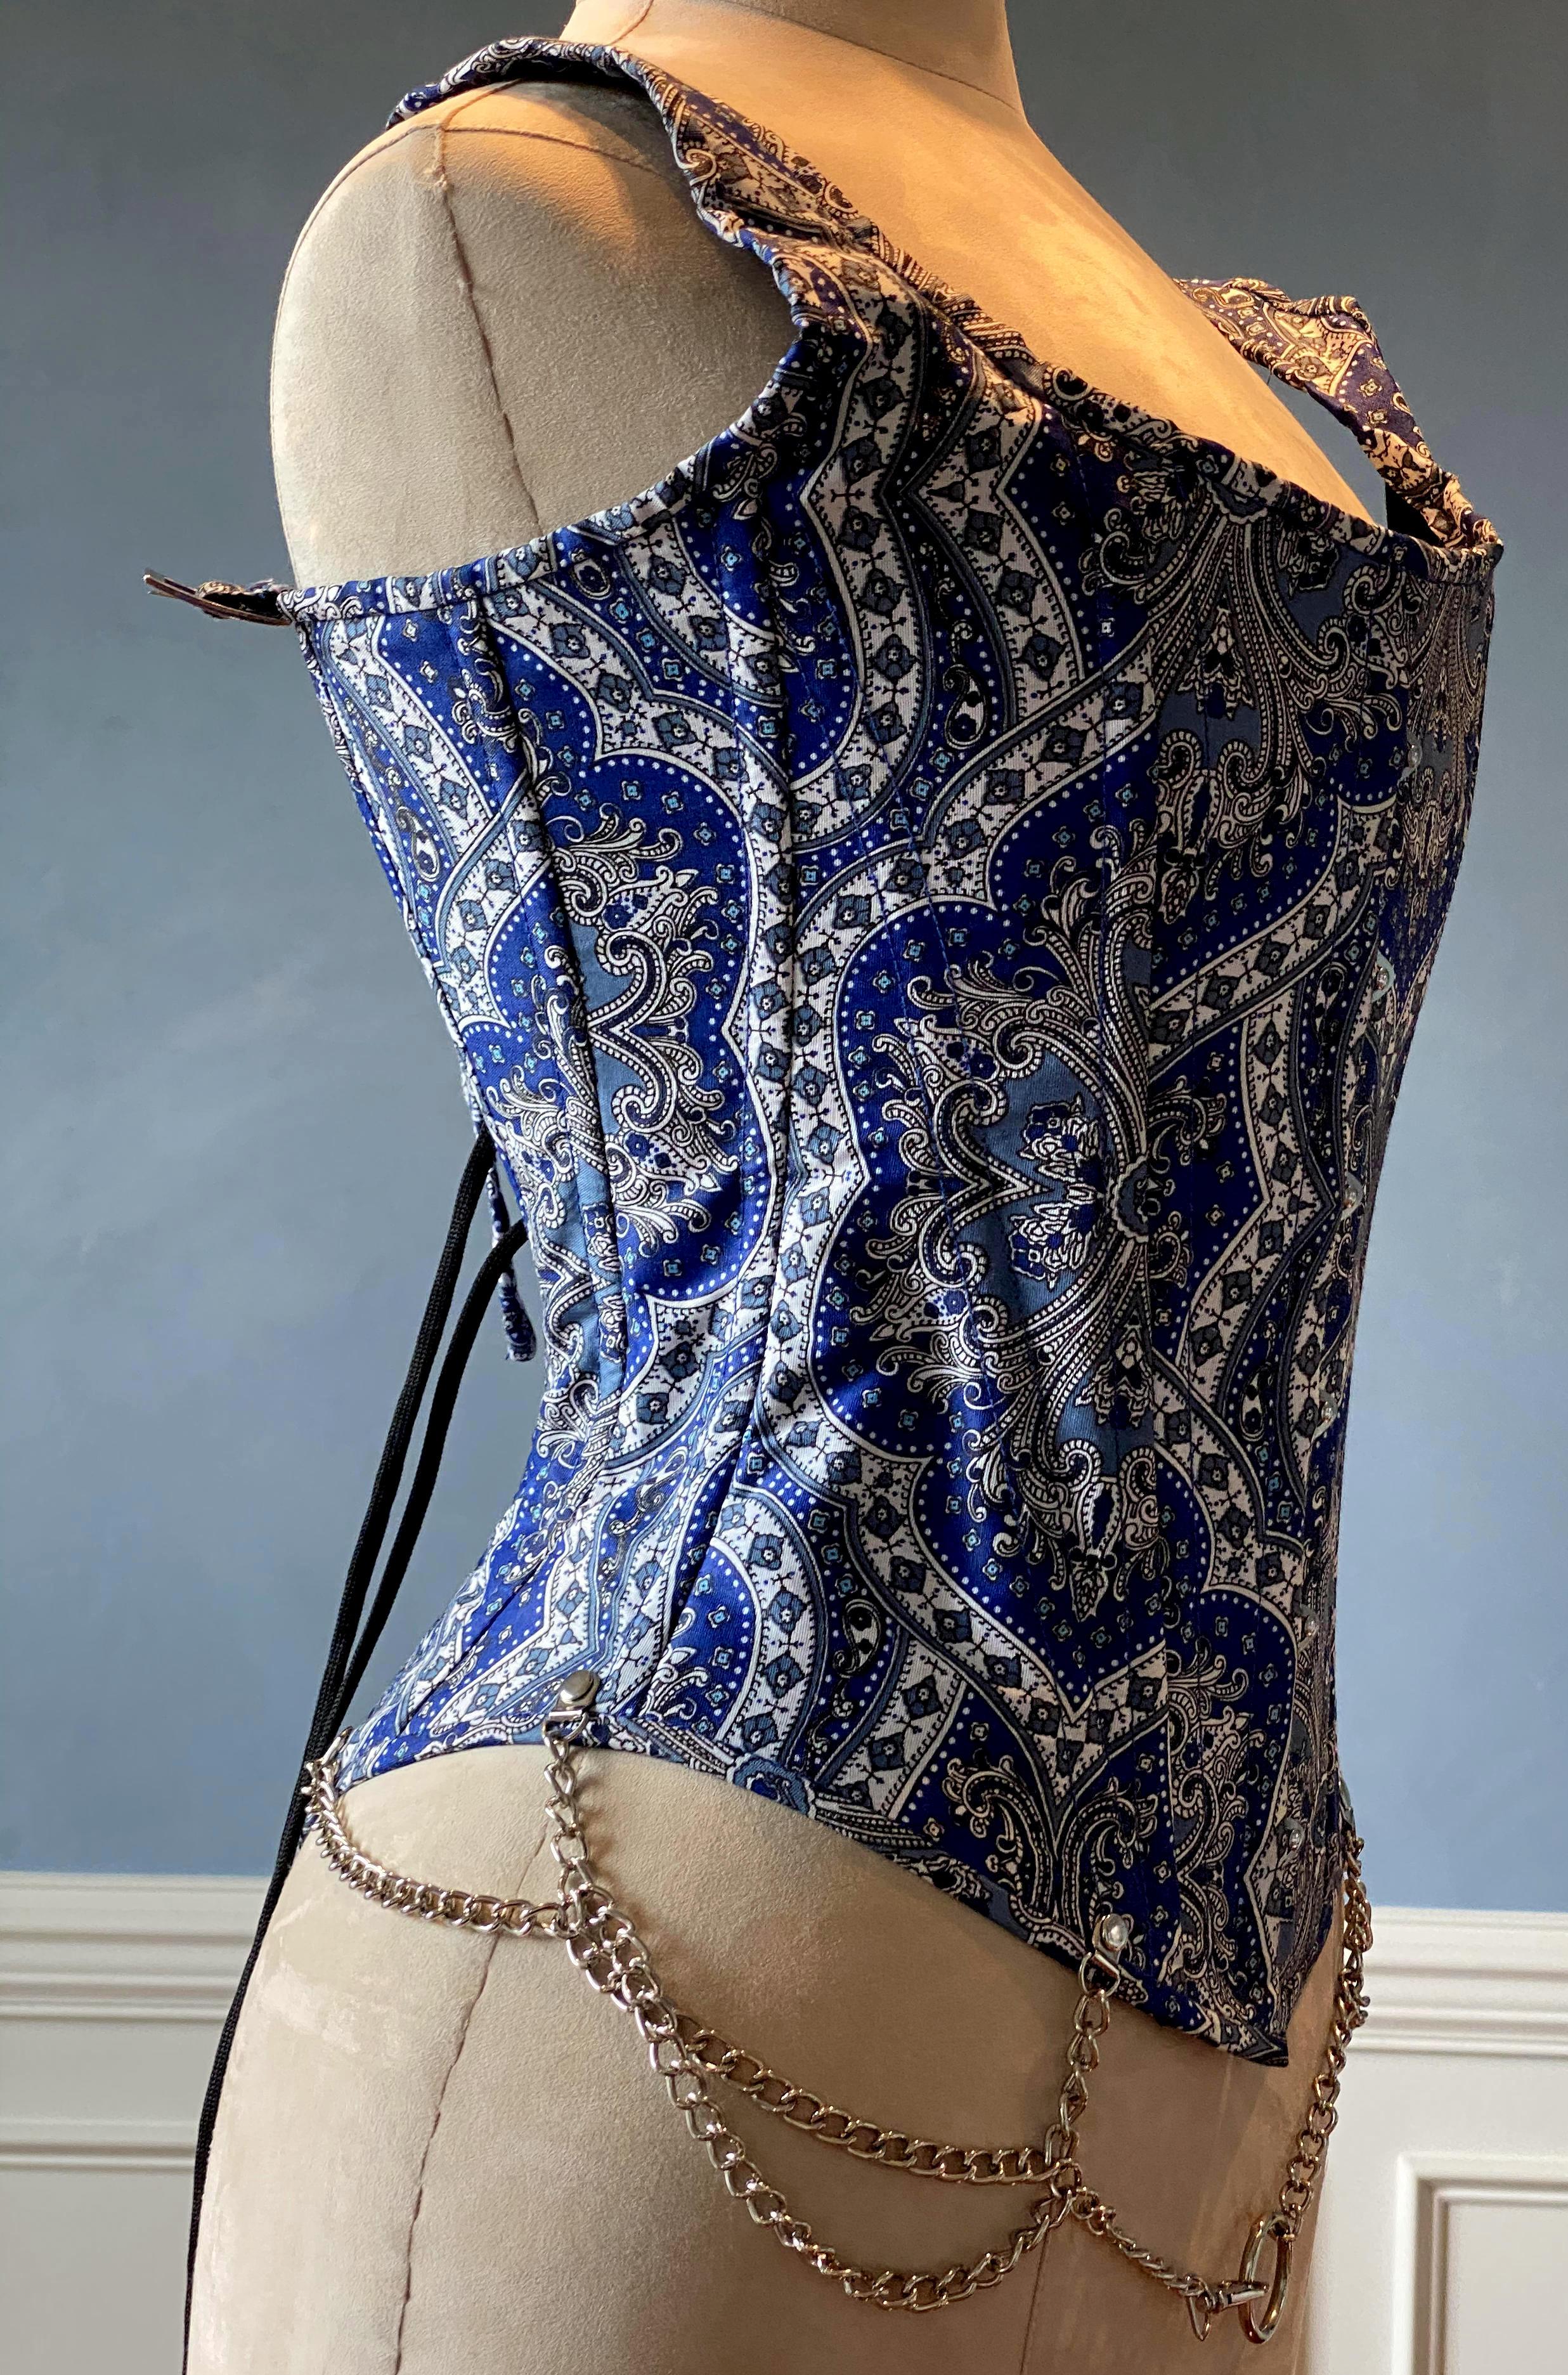 Classic brocade overbust corset vest inspired by Audrey Hepburn with s –  Corsettery Authentic Corsets USA